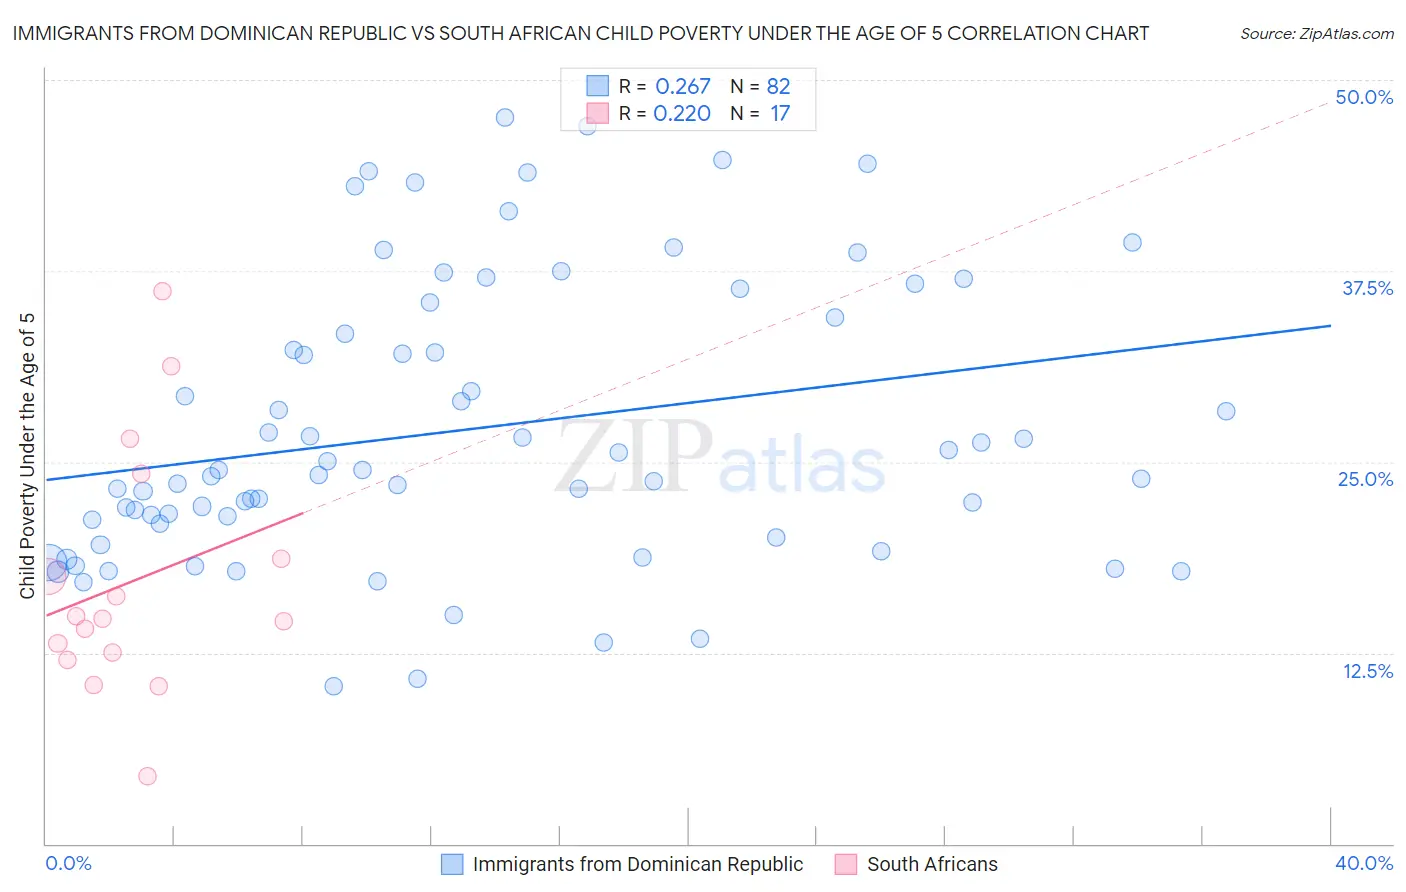 Immigrants from Dominican Republic vs South African Child Poverty Under the Age of 5